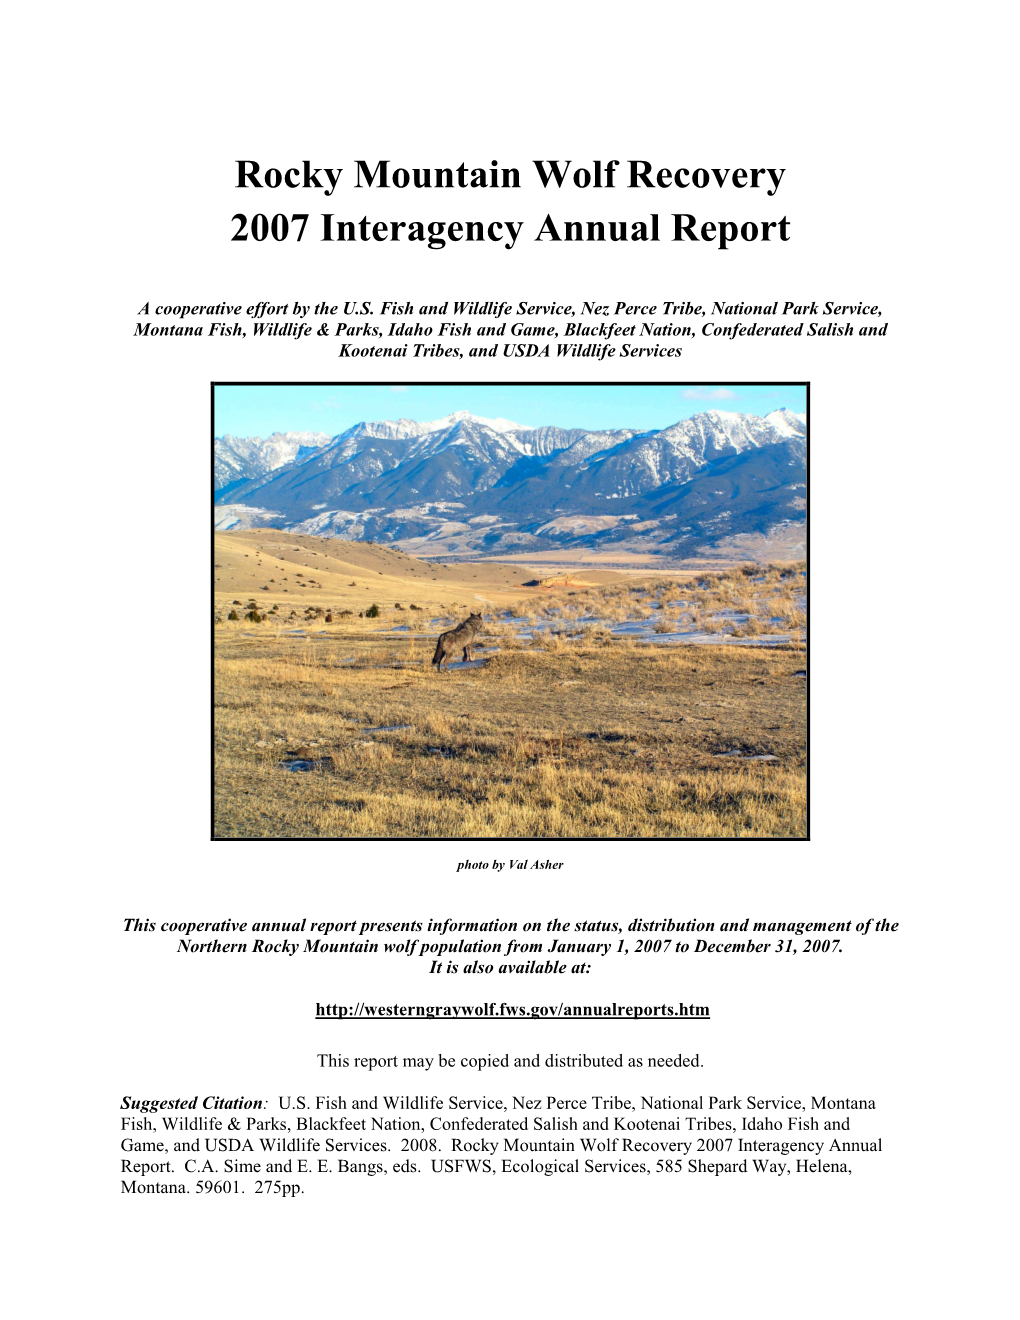 Rocky Mountain Wolf Recovery 2007 Interagency Annual Report